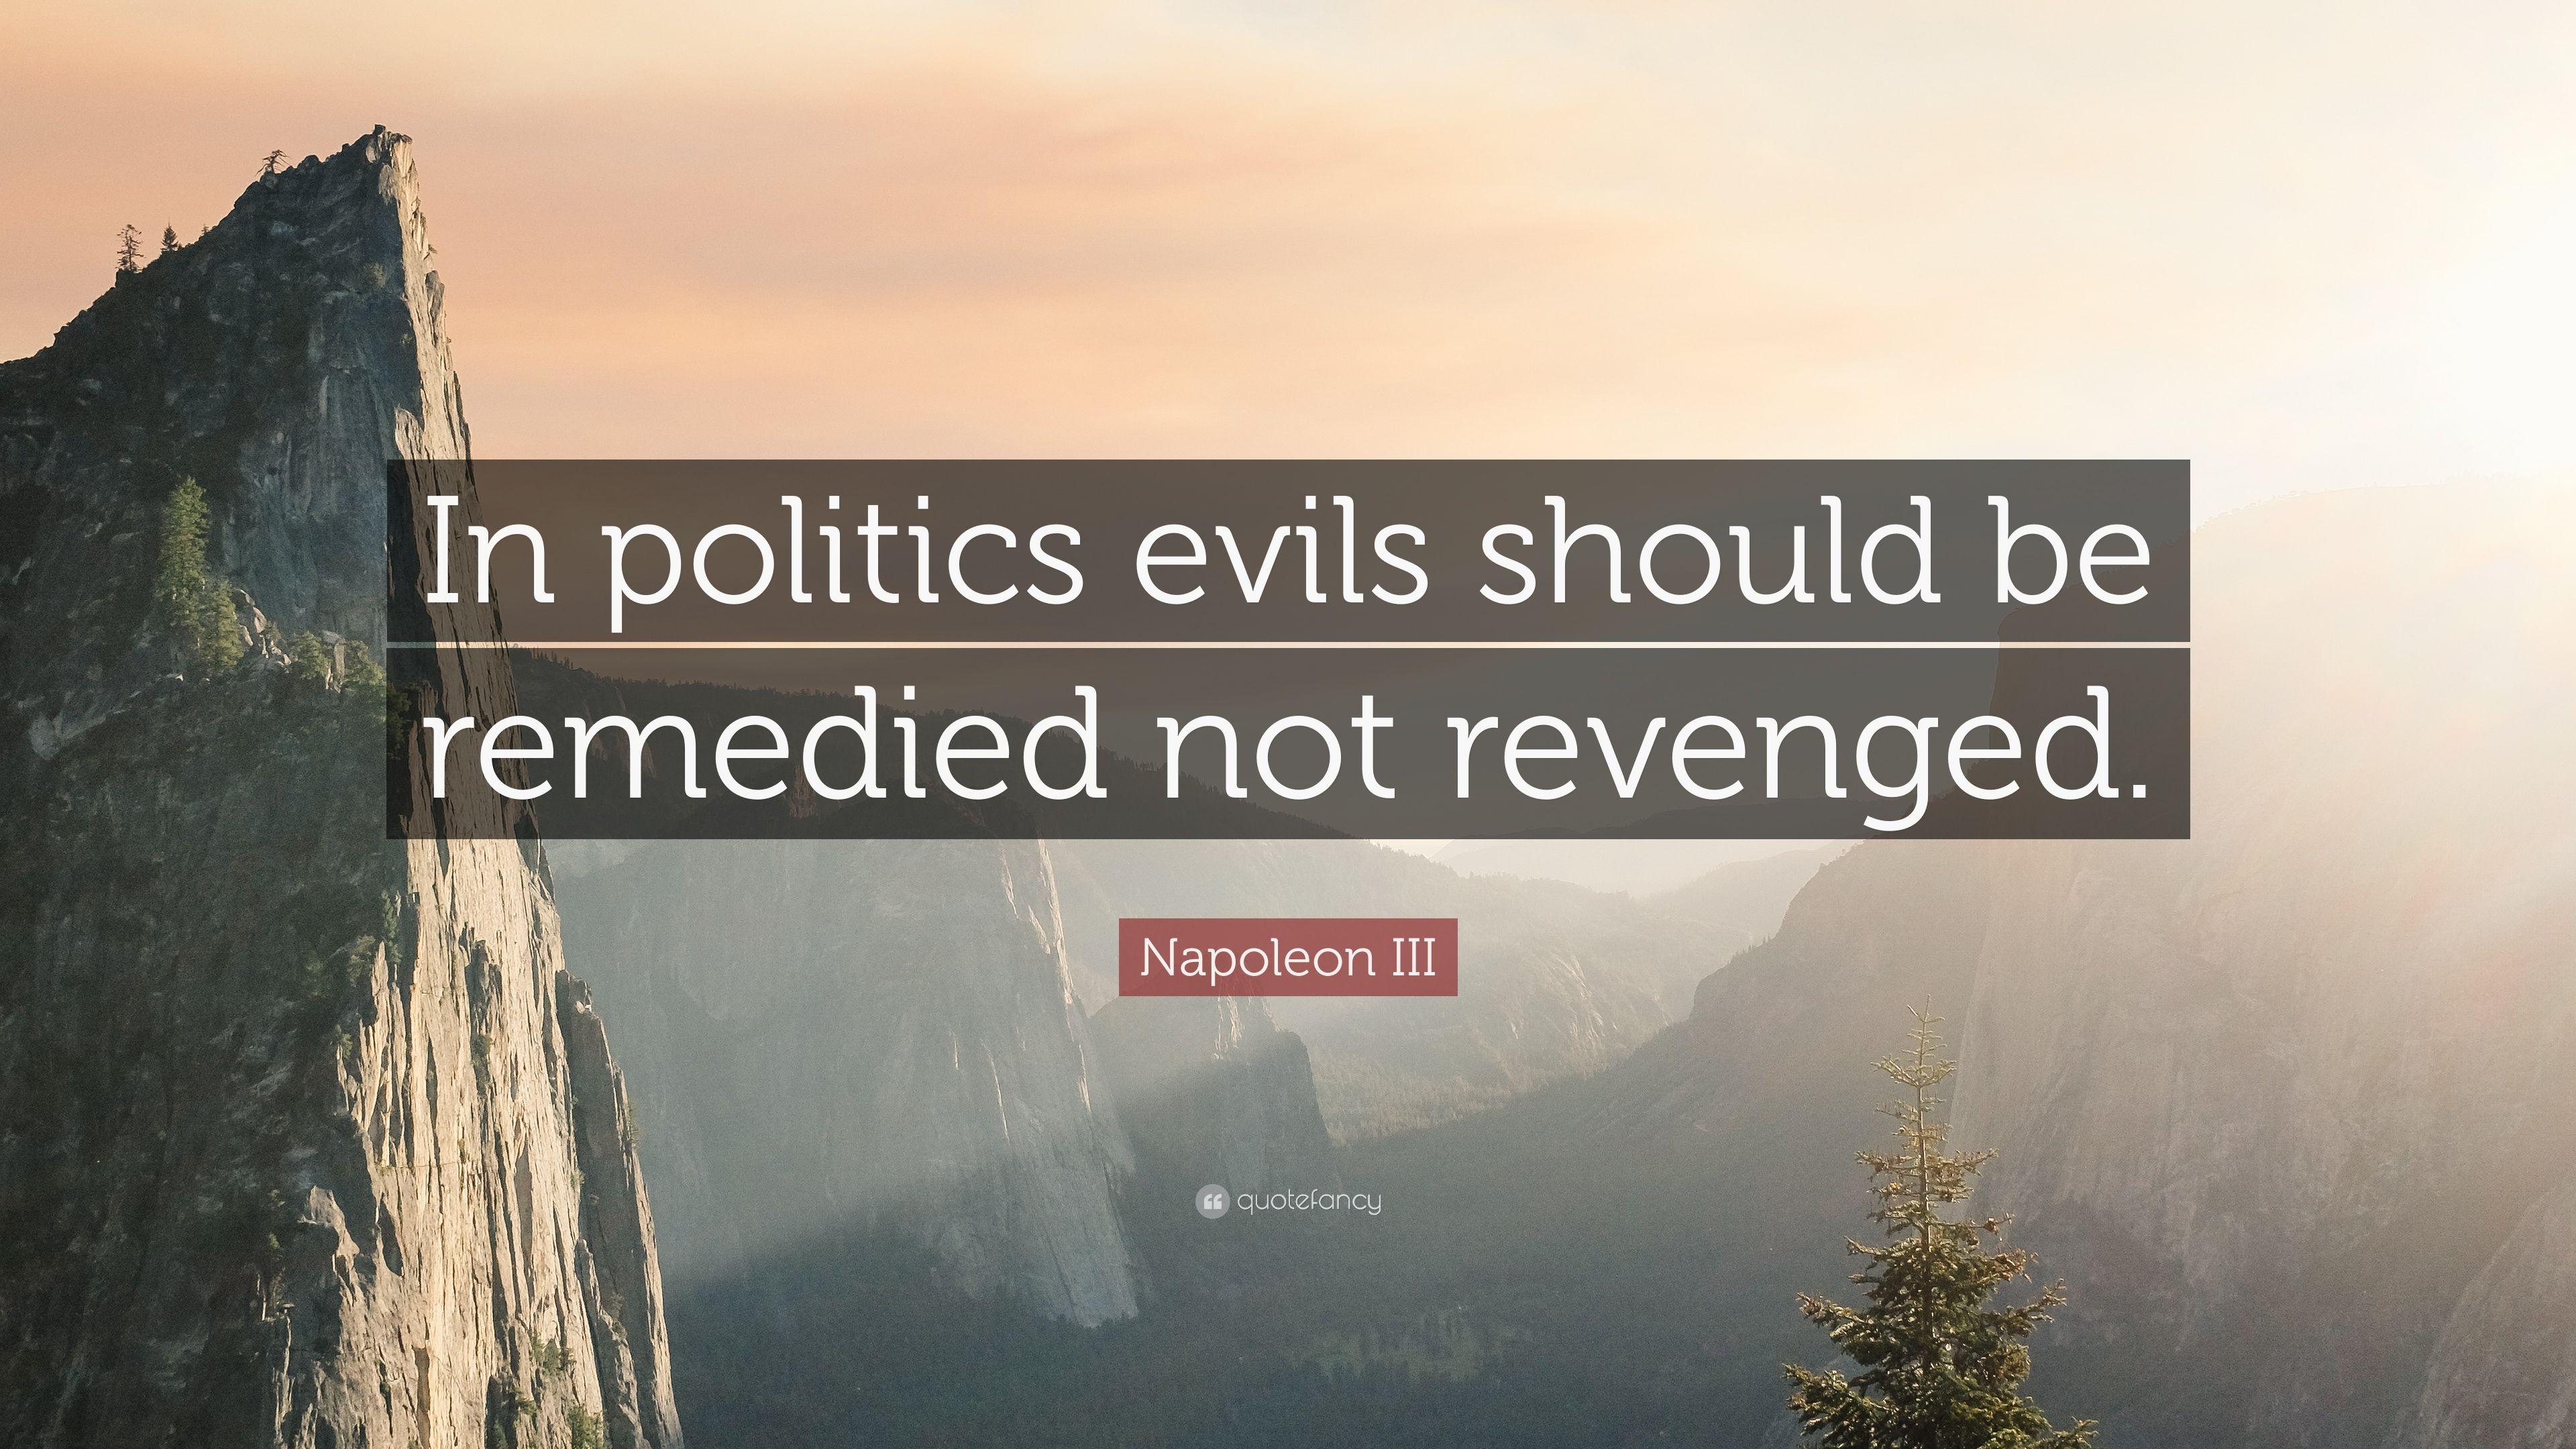 Napoleon III Quote: “In politics evils should be remedied not